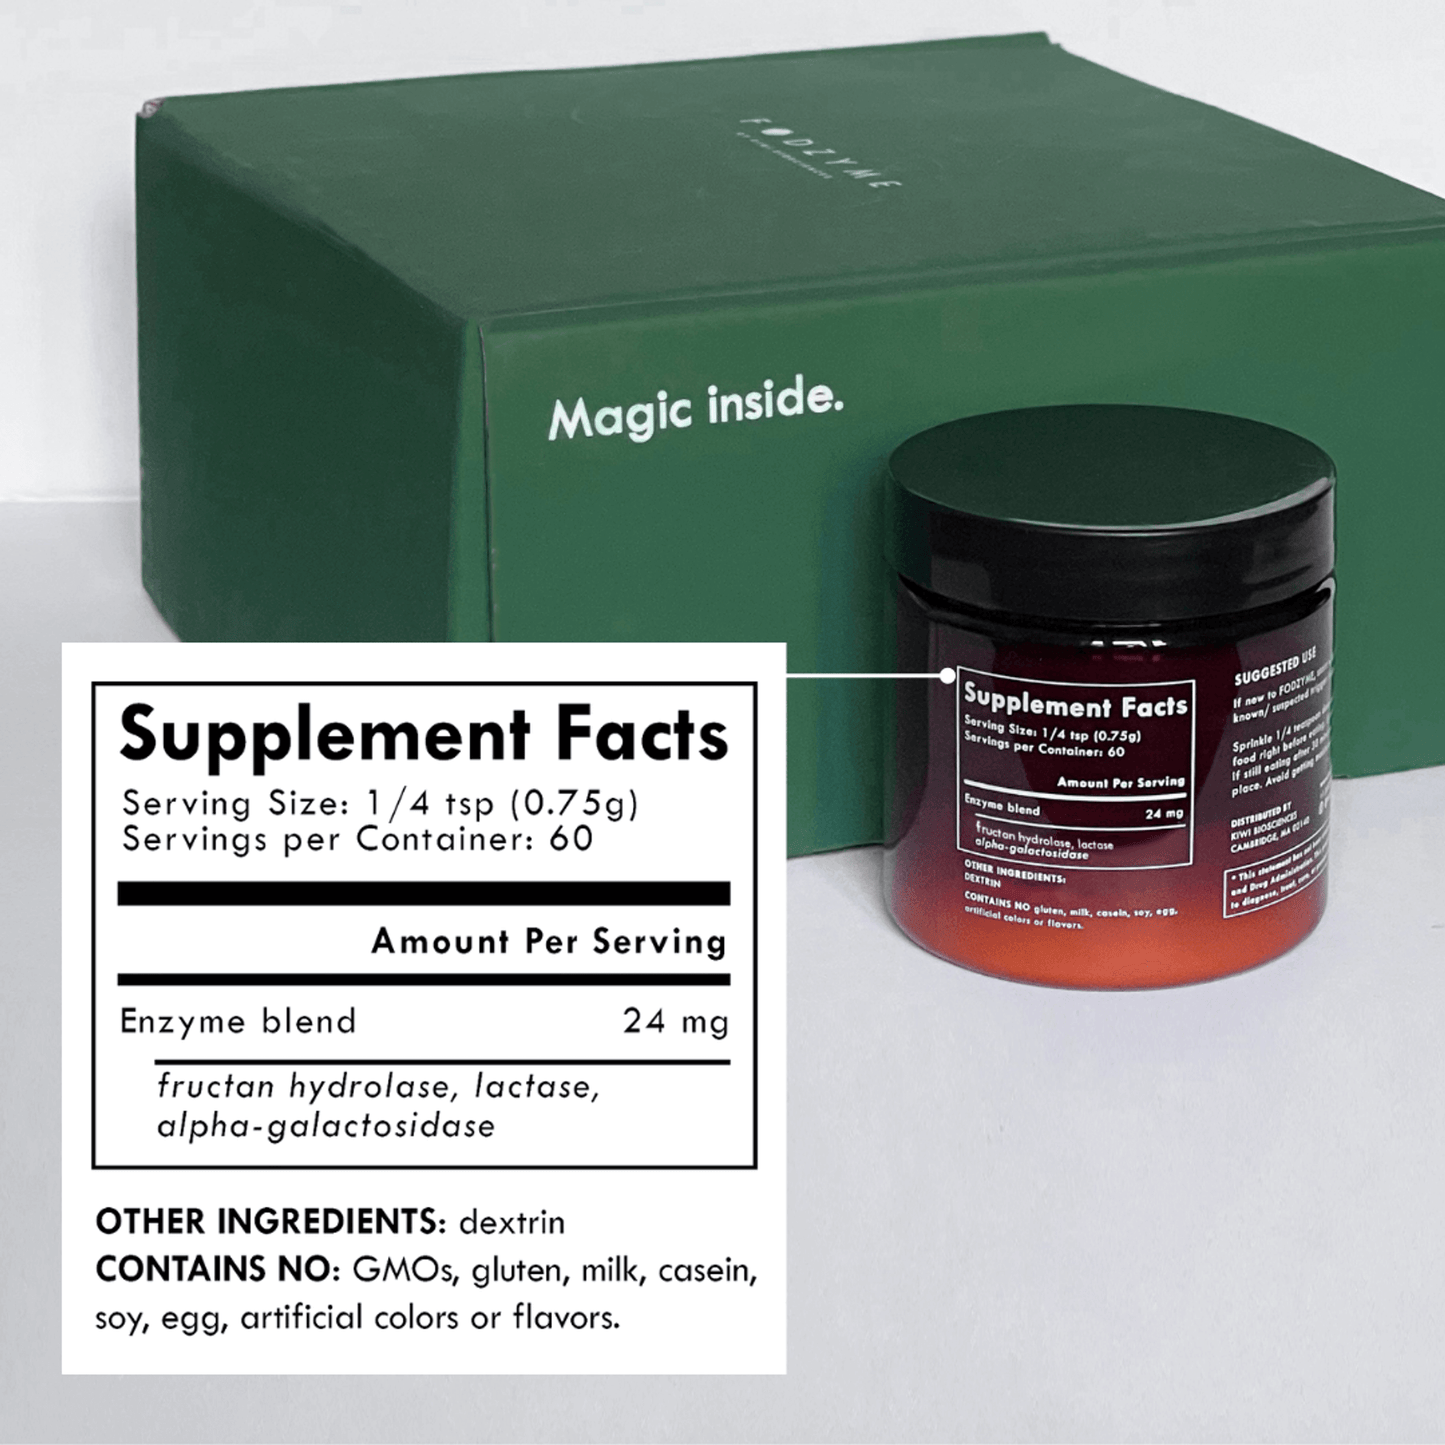 Glow Proteins - FODZYME Home Kit Supplement Facts